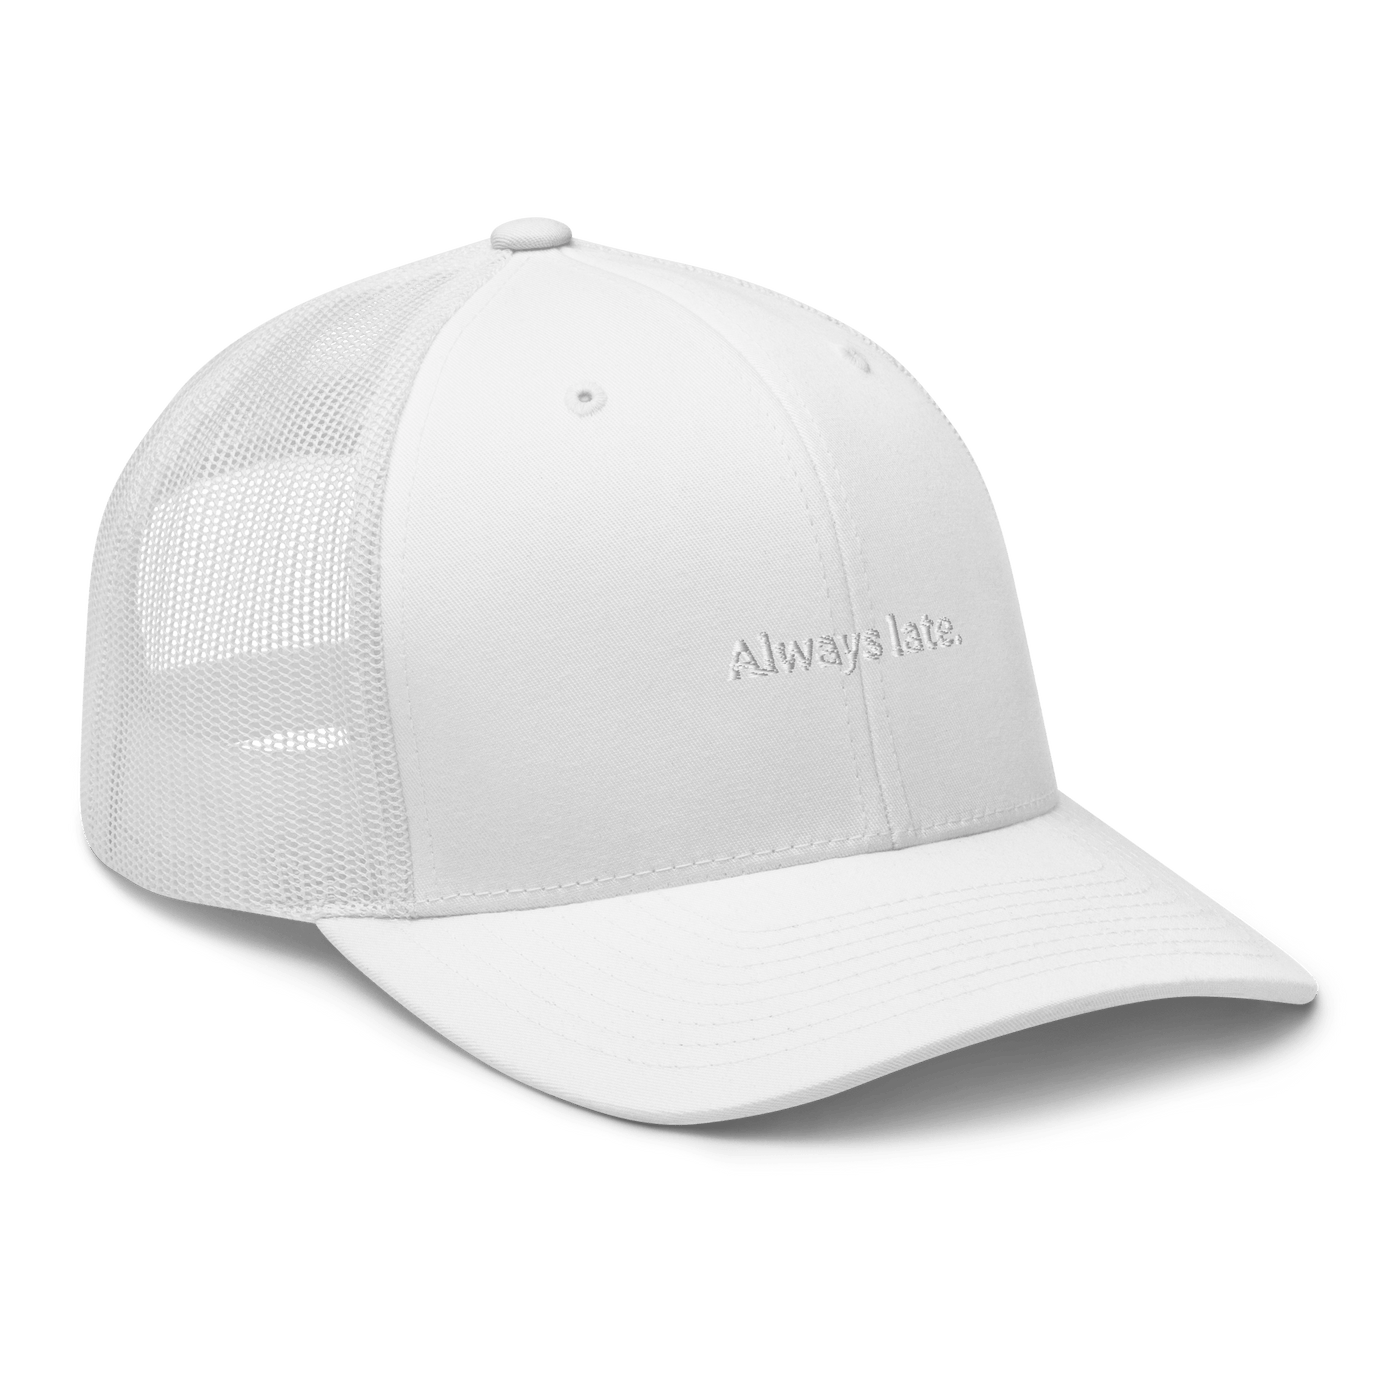 Always Late. Trucker Cap - White - - Just Another Cap Store